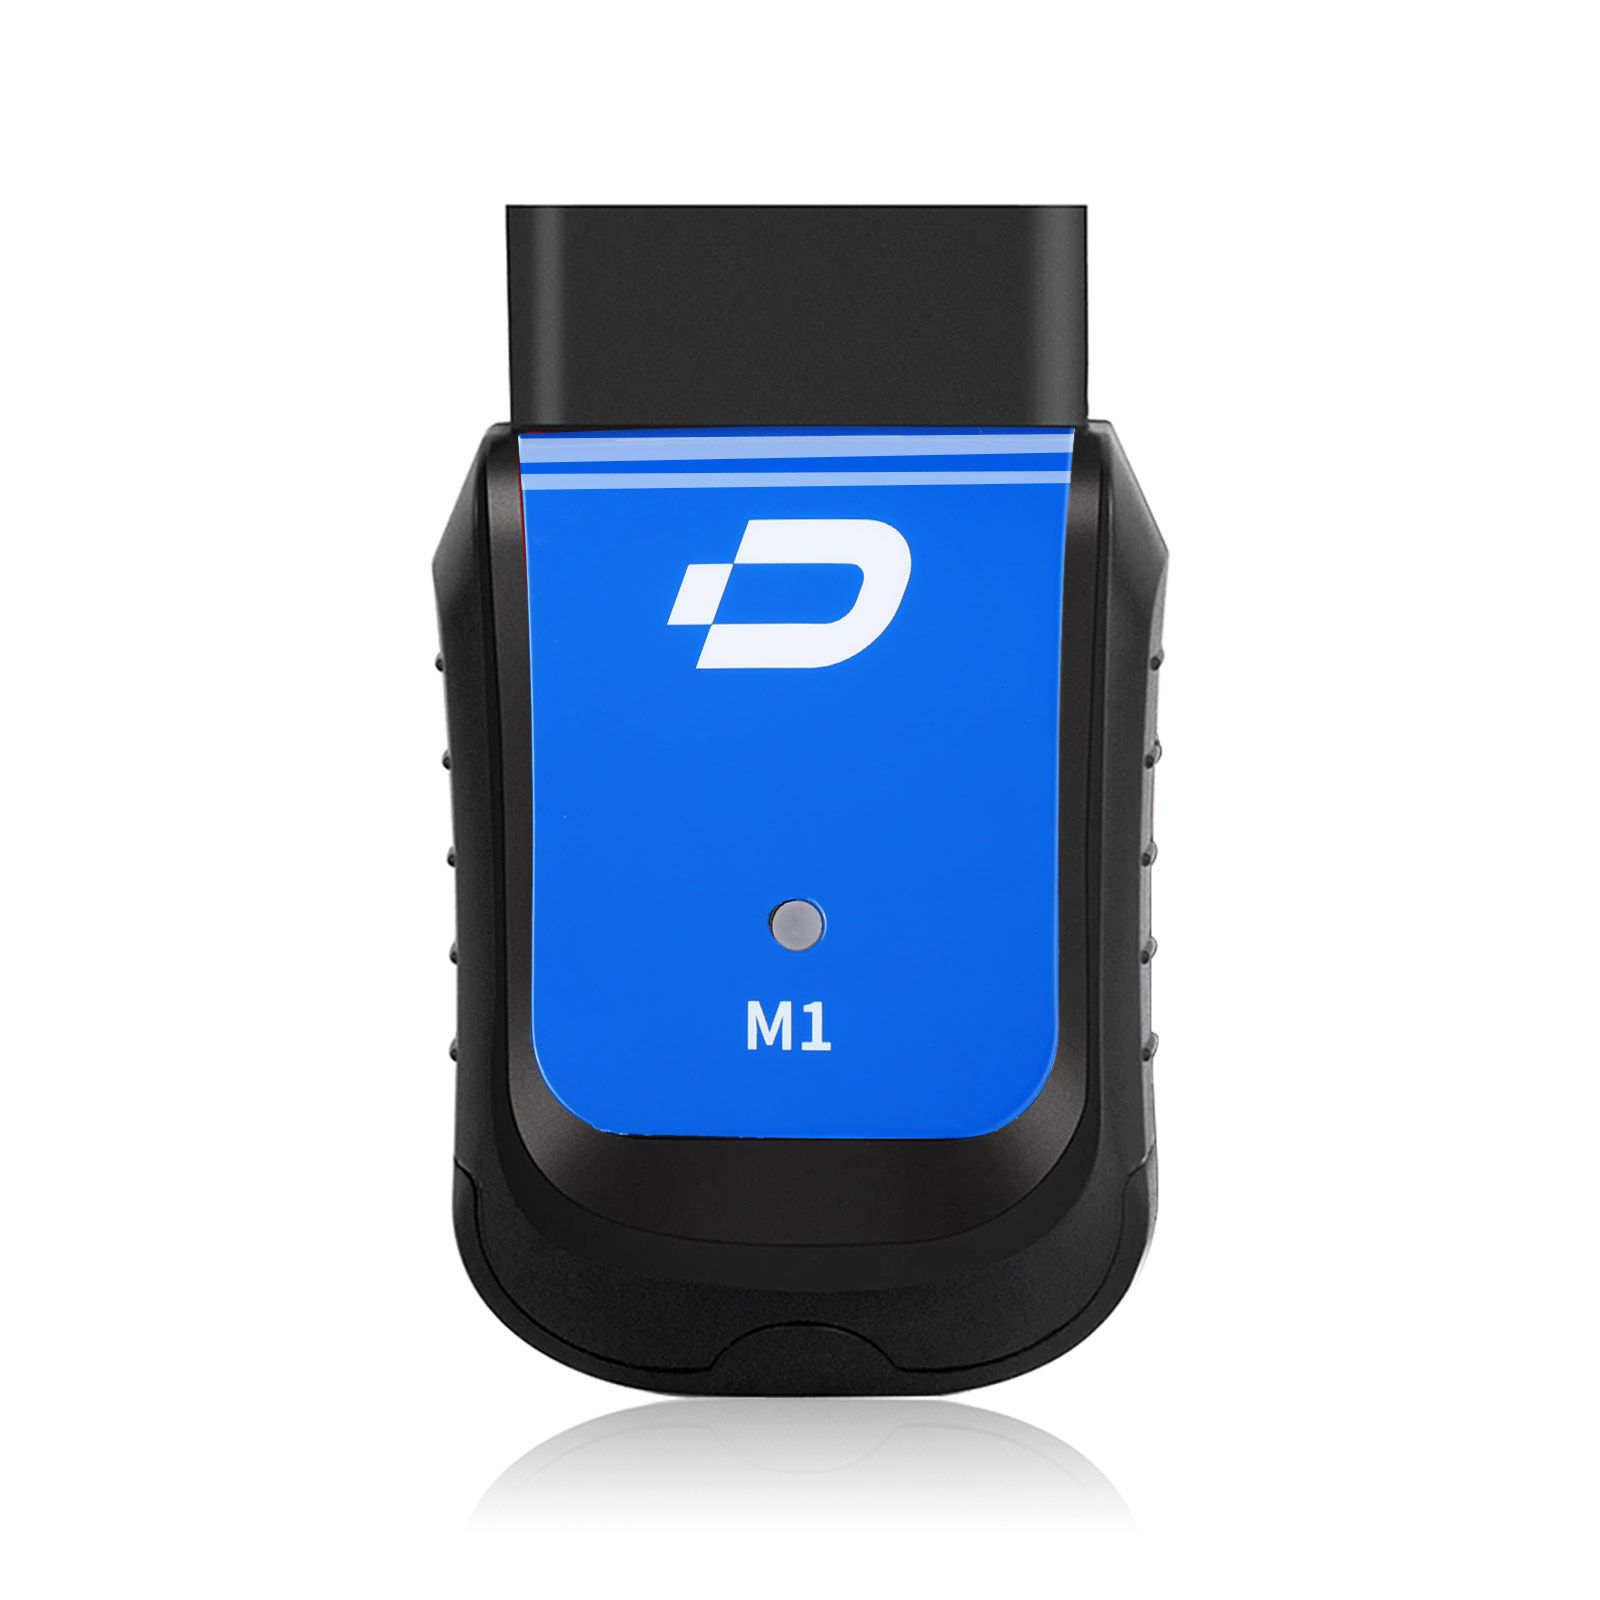 MTDIAG M1 Professional Diagnostic Scan Tool for BMW Motorcycle with Comprehensive Functions Customized Mobile Diagnostic Instrument